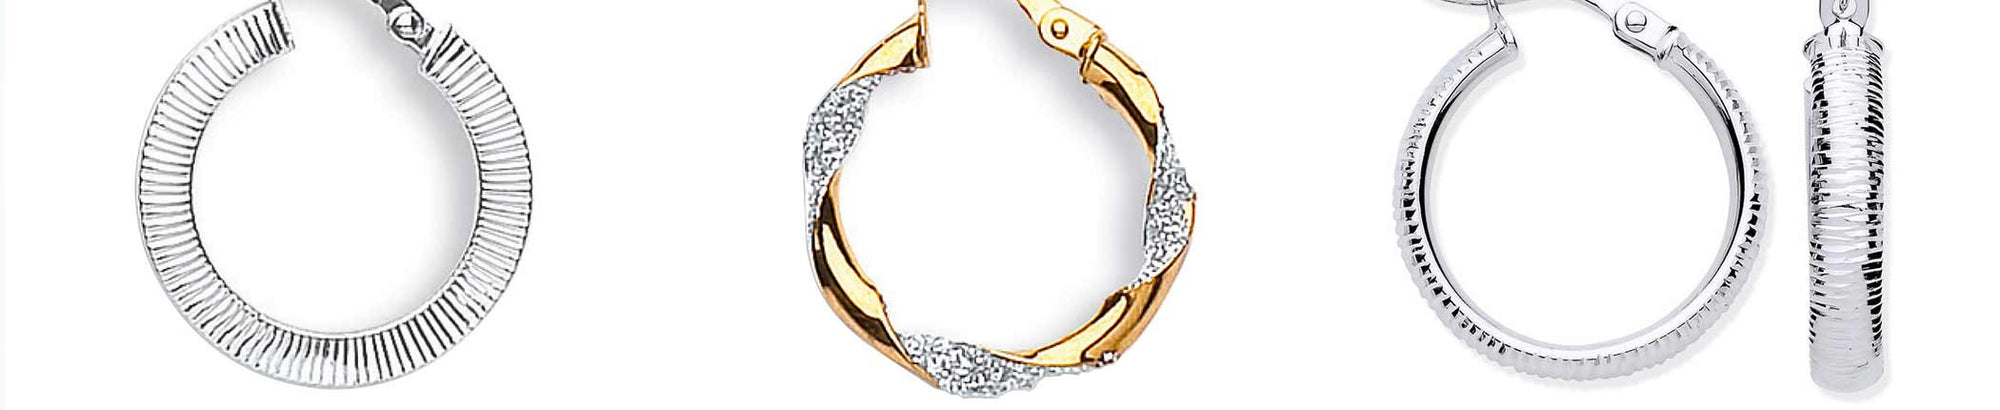 <font color=#000000>10 reasons why chunky silver hoops are so versatile</font>